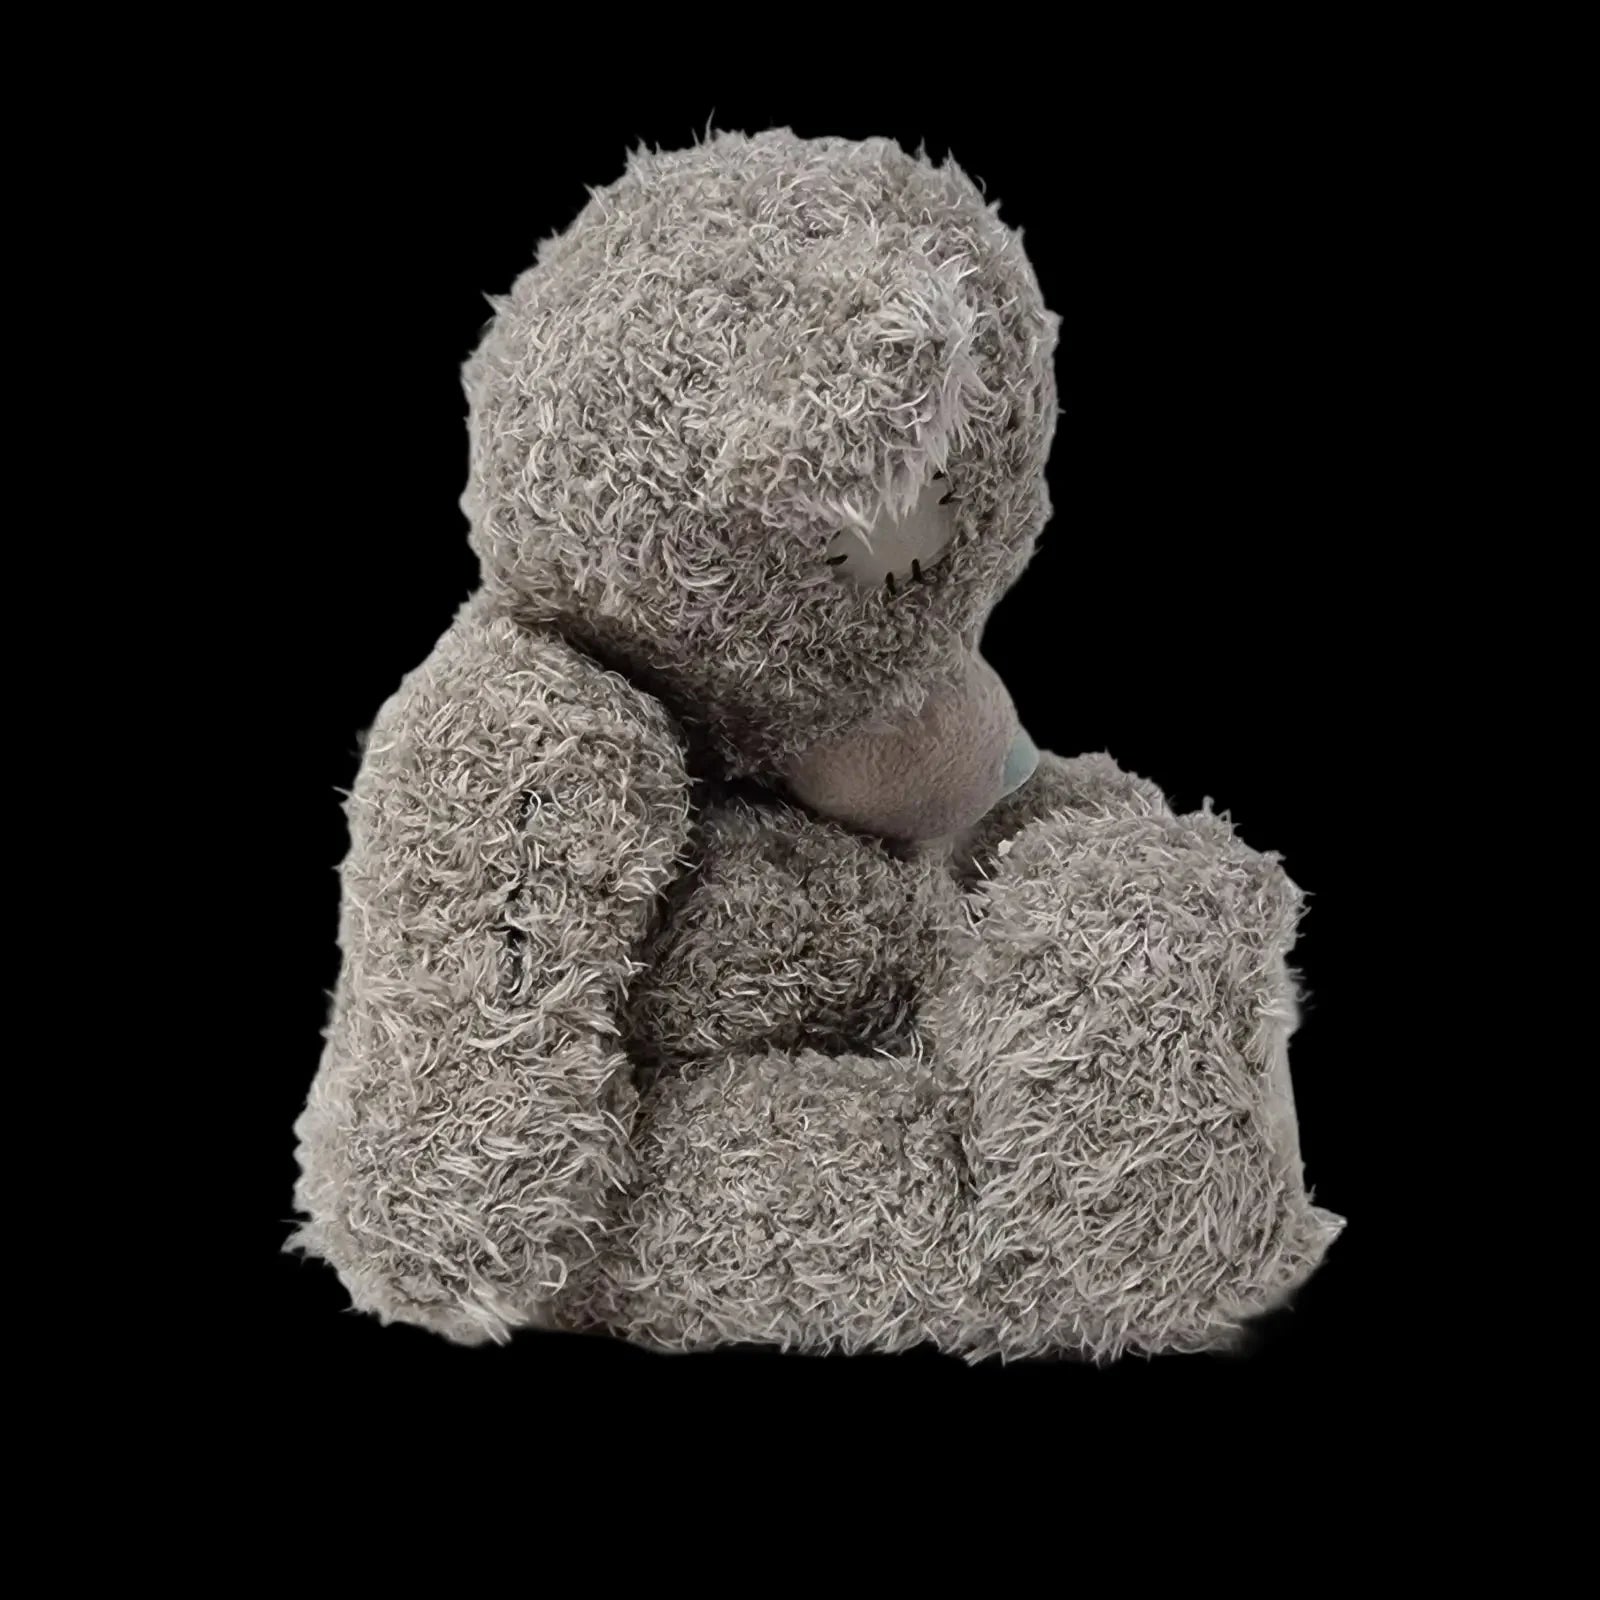 Me To You Soft Cuddly Toy Grey Plush Teddy Bears Small - 3